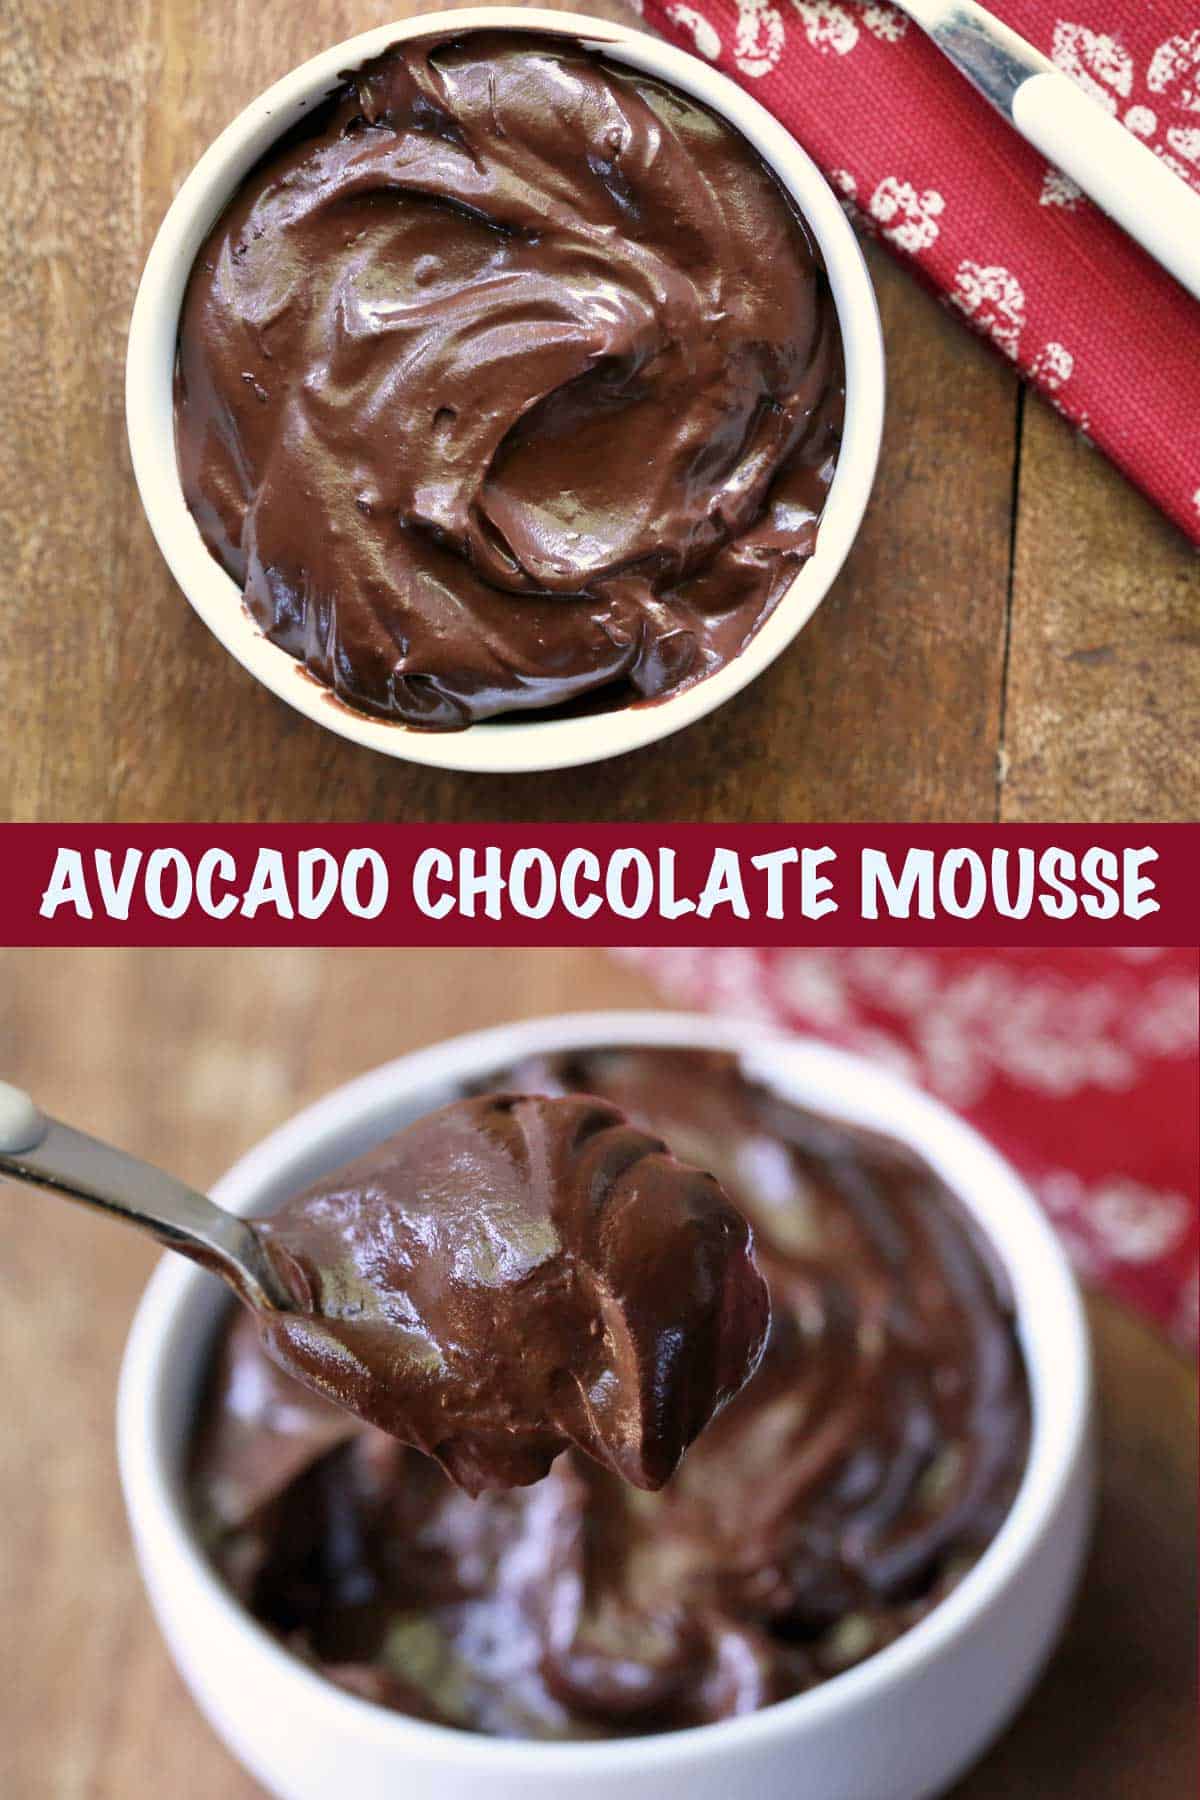 Two photos of a chocolate mousse made with avocado.